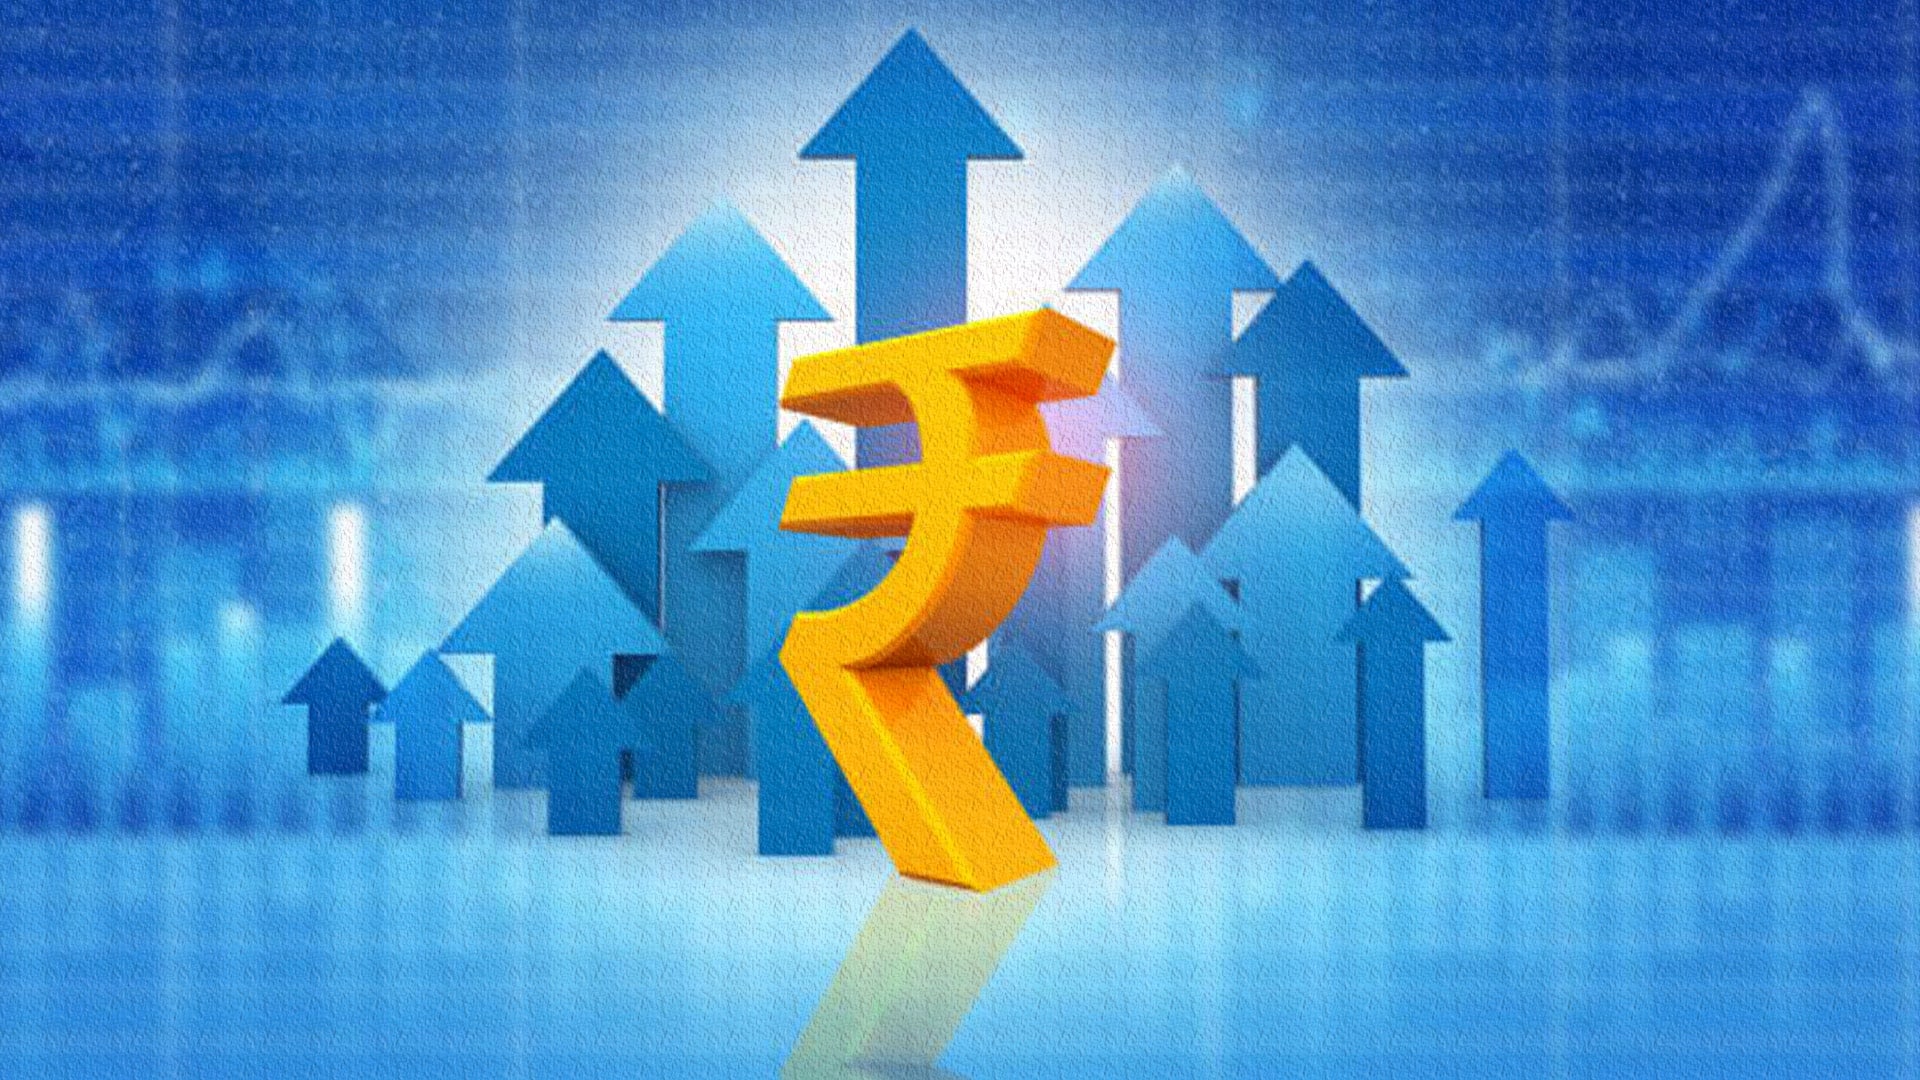 India likely to grow at 7.8% in FY23 with risk tilted towards downside: Report